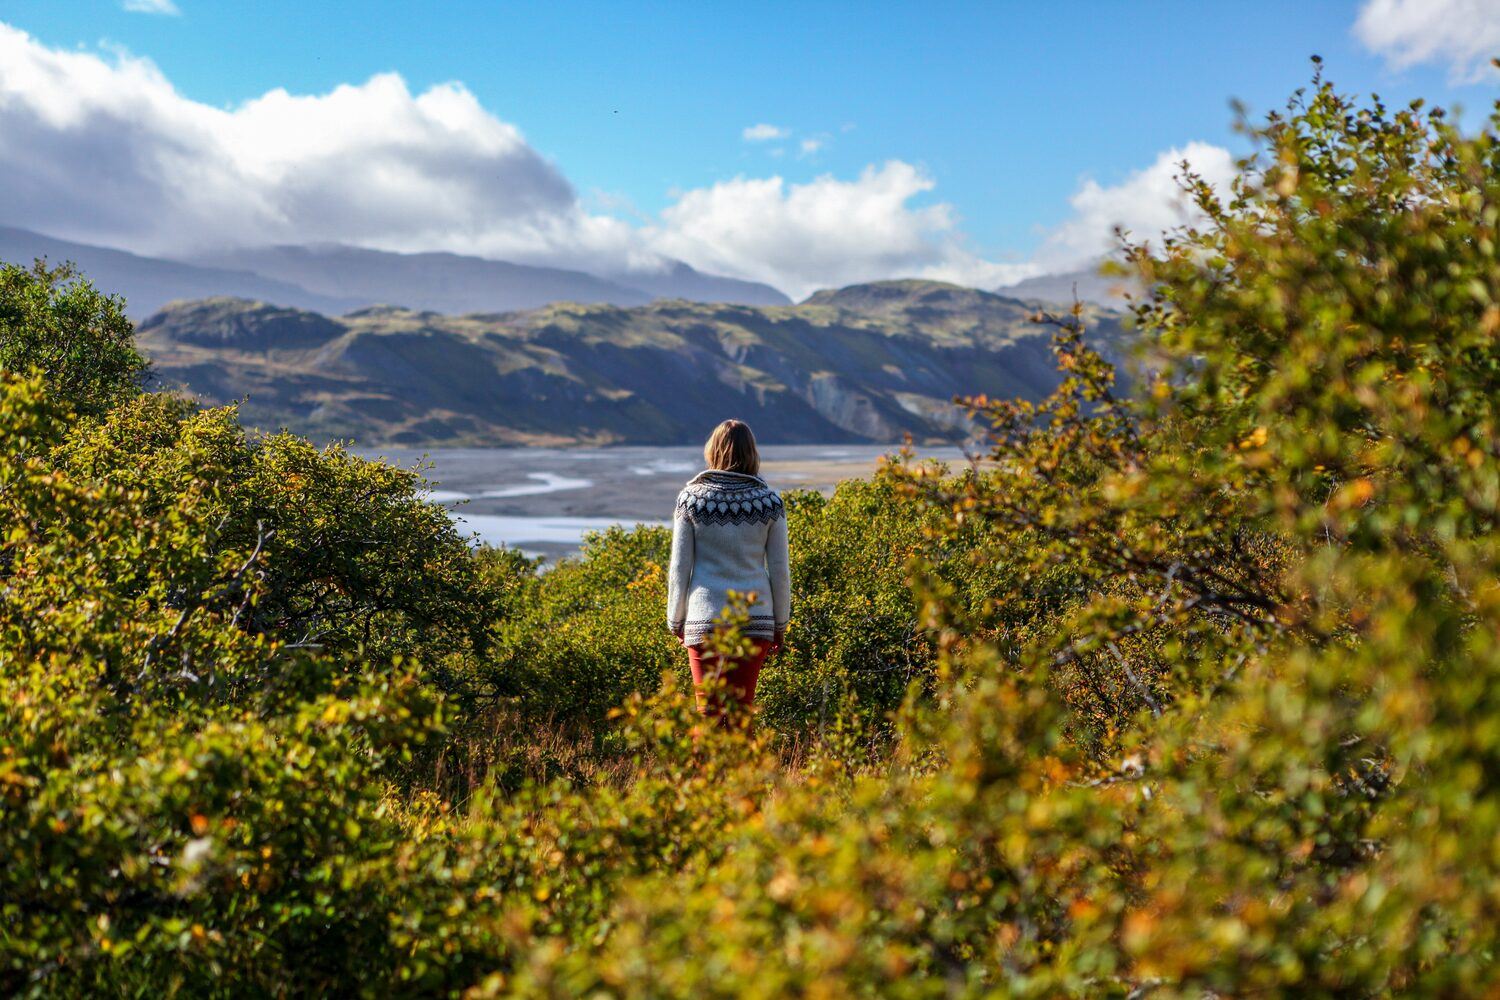 Woman in sweater, standing admiring mountain view in Iceland, surrounded by green bushes.